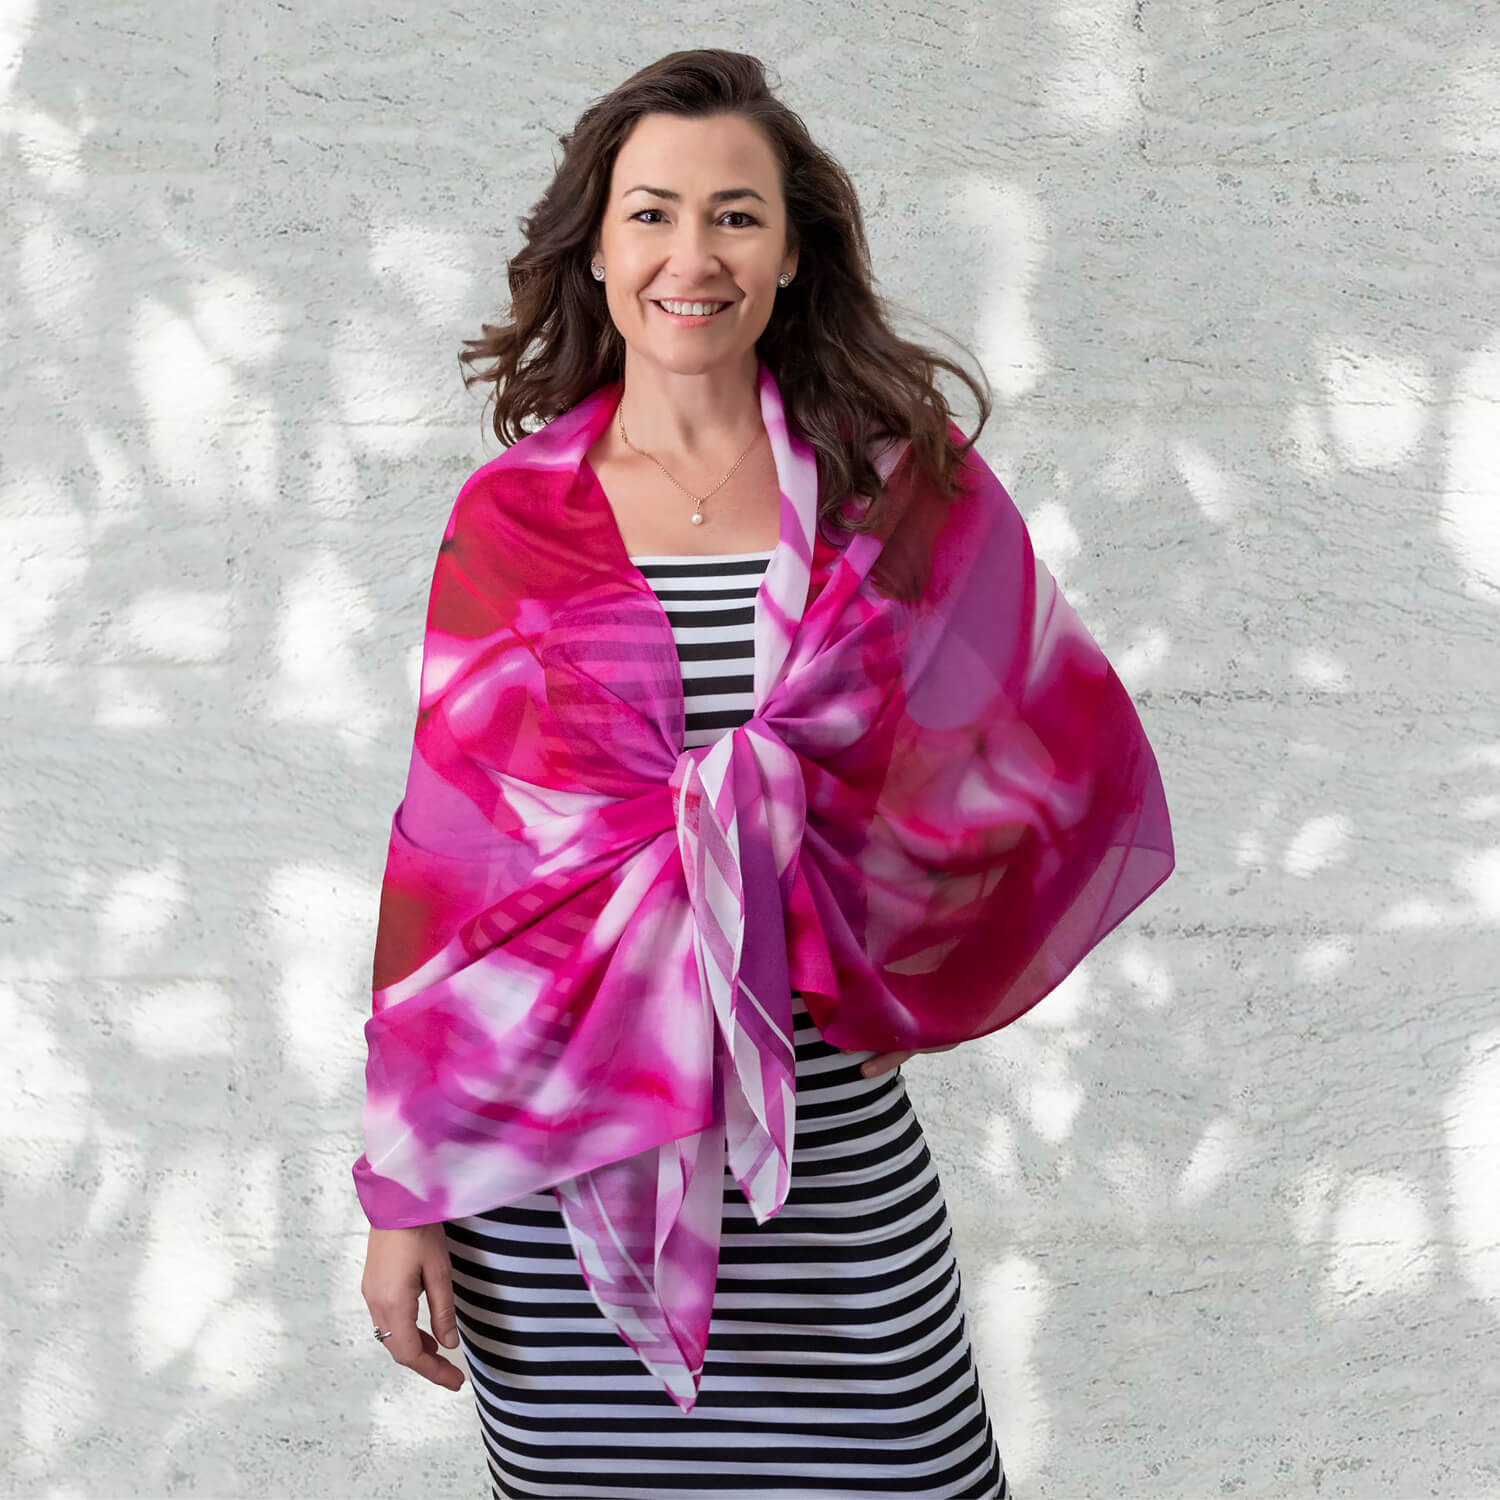 leaves of hot pink scarf wrap with striped dress